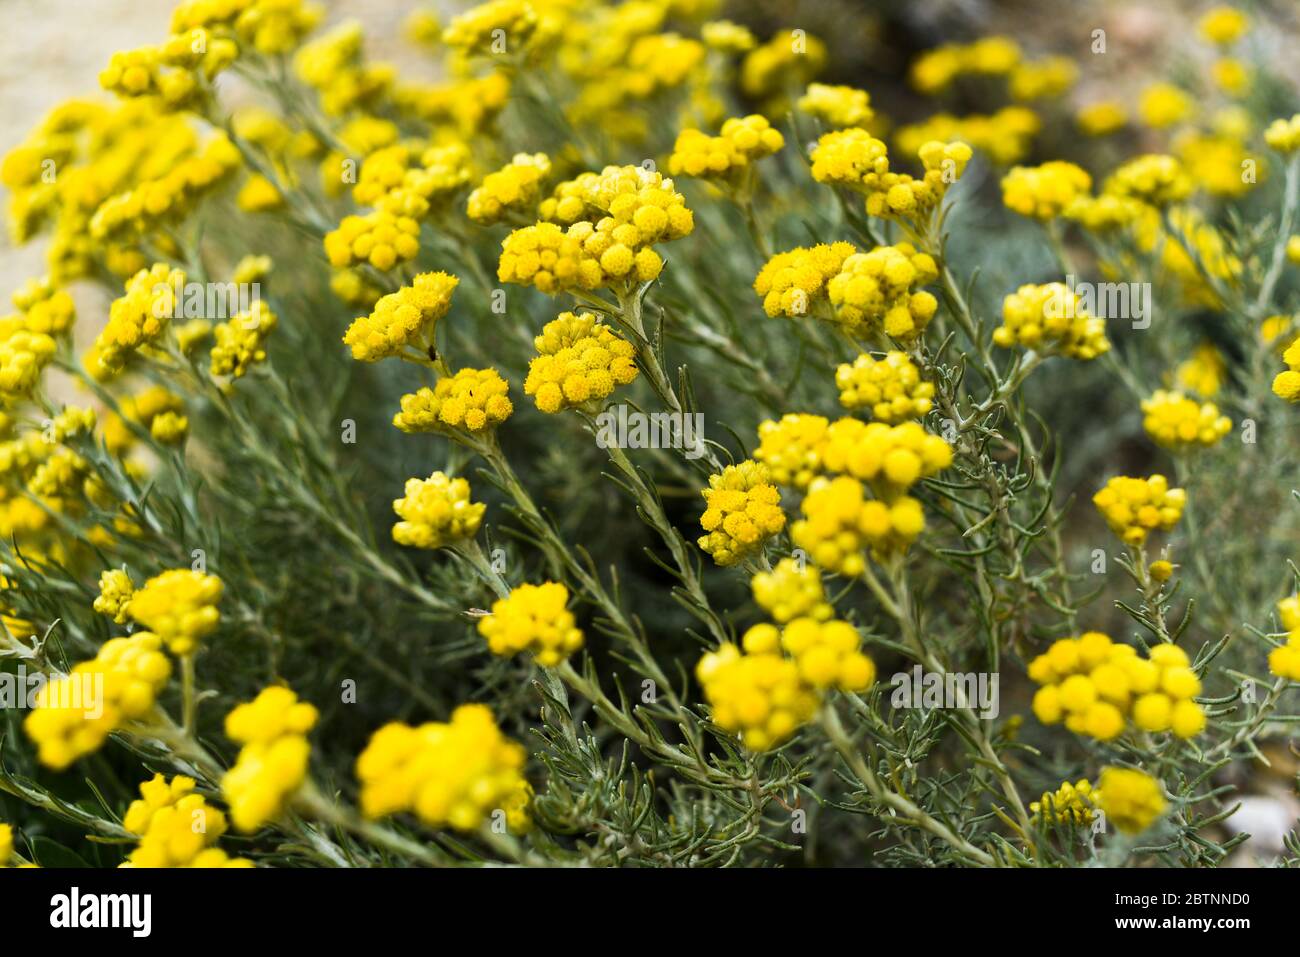 Helichrysum stoechas blooming in a field springtime. Stock Photo